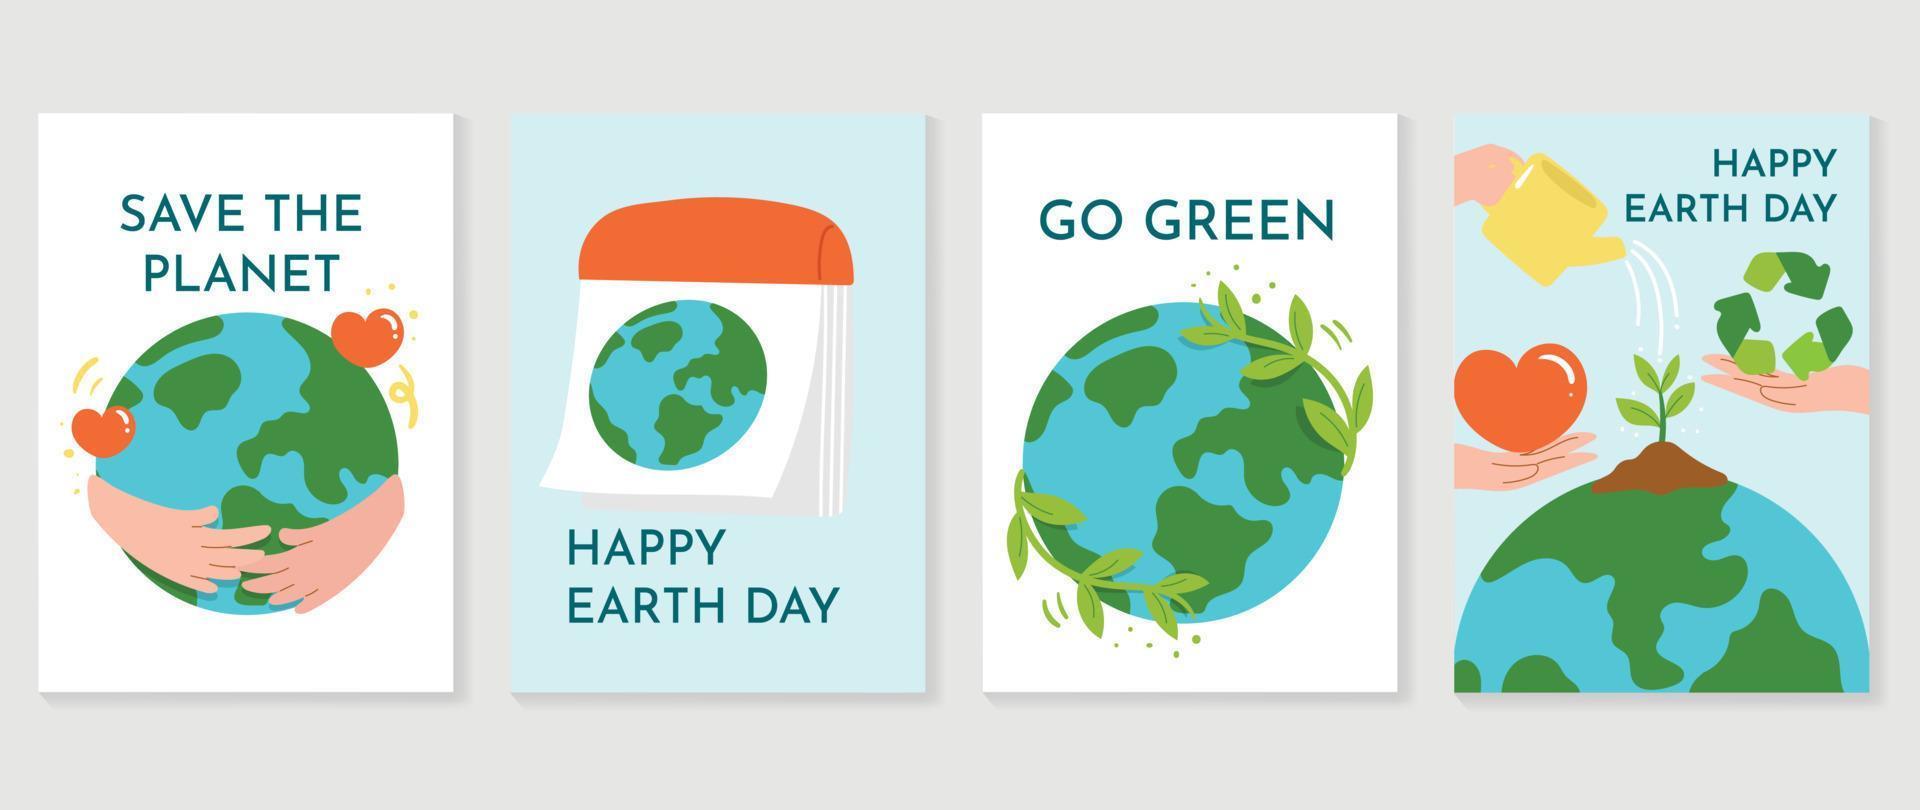 Happy Earth day concept, 22 April, cover vector. Save the earth, globe, plant trees, hugging earth, calendar, recycle. Eco friendly illustration design for web, banner, campaign, social media post. vector